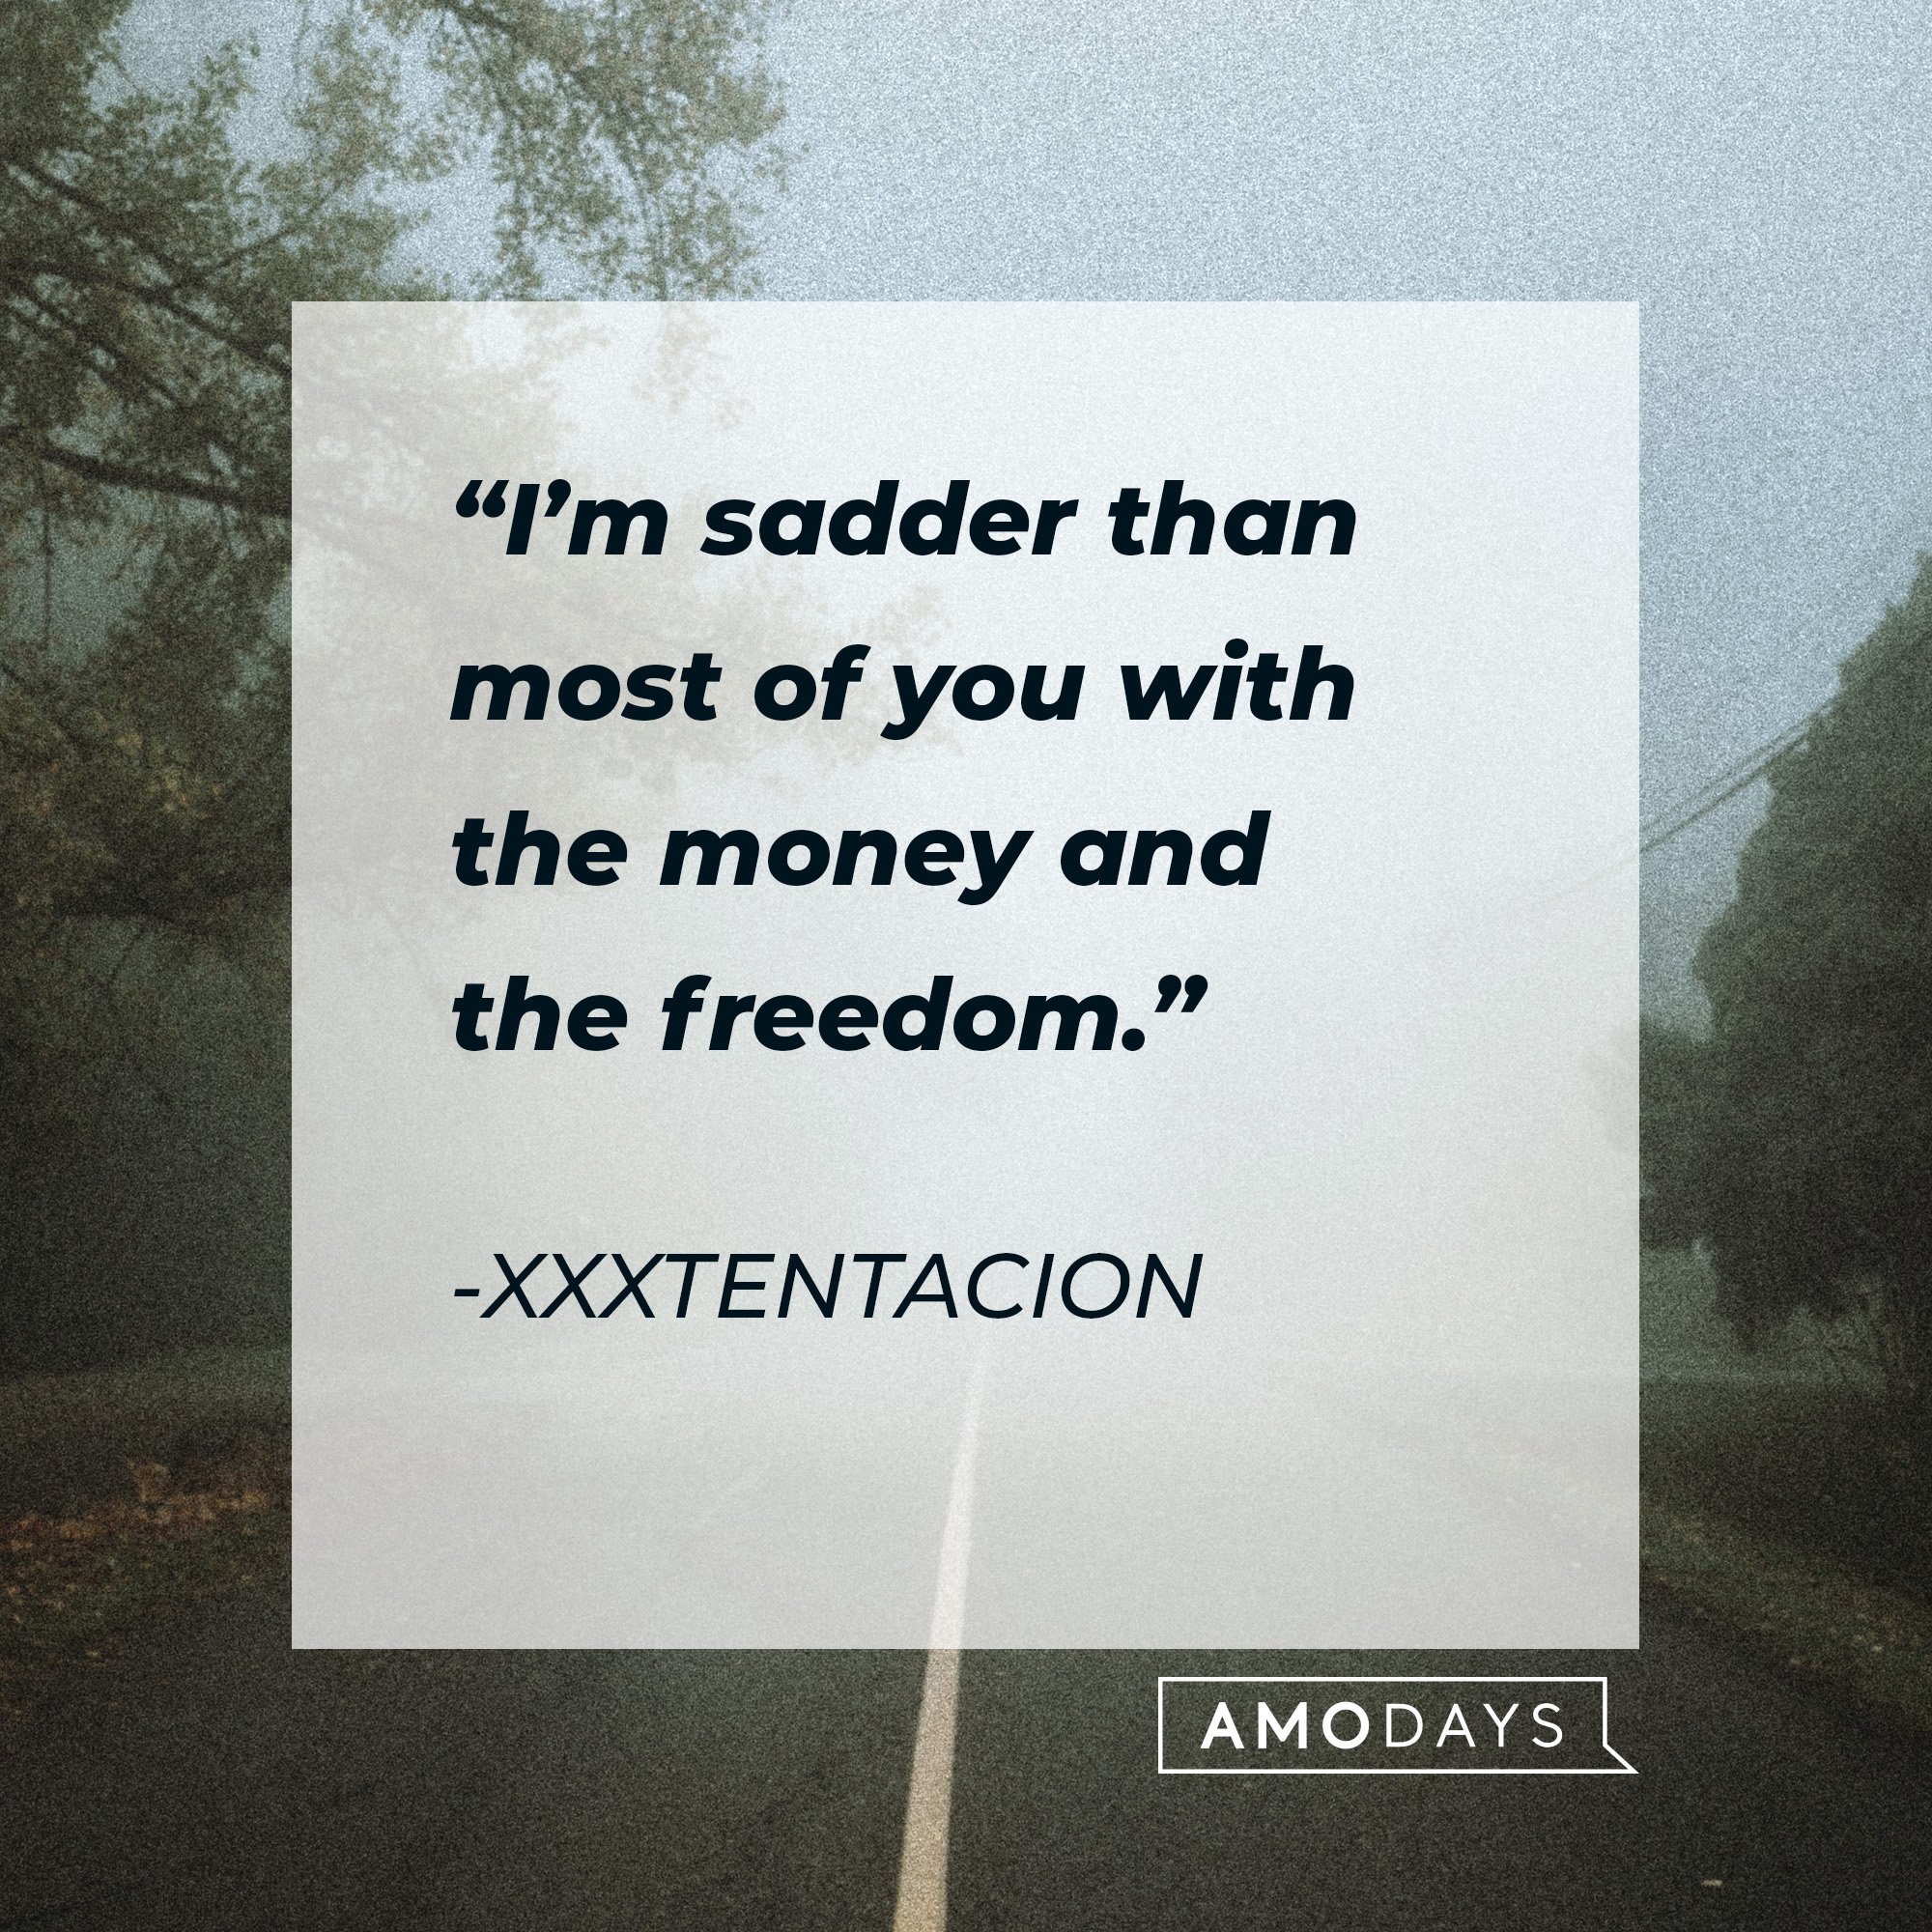 Xxxtentacion’s quote: “I’m sadder than most of you with the money and the freedom.”  | Image: AmoDays